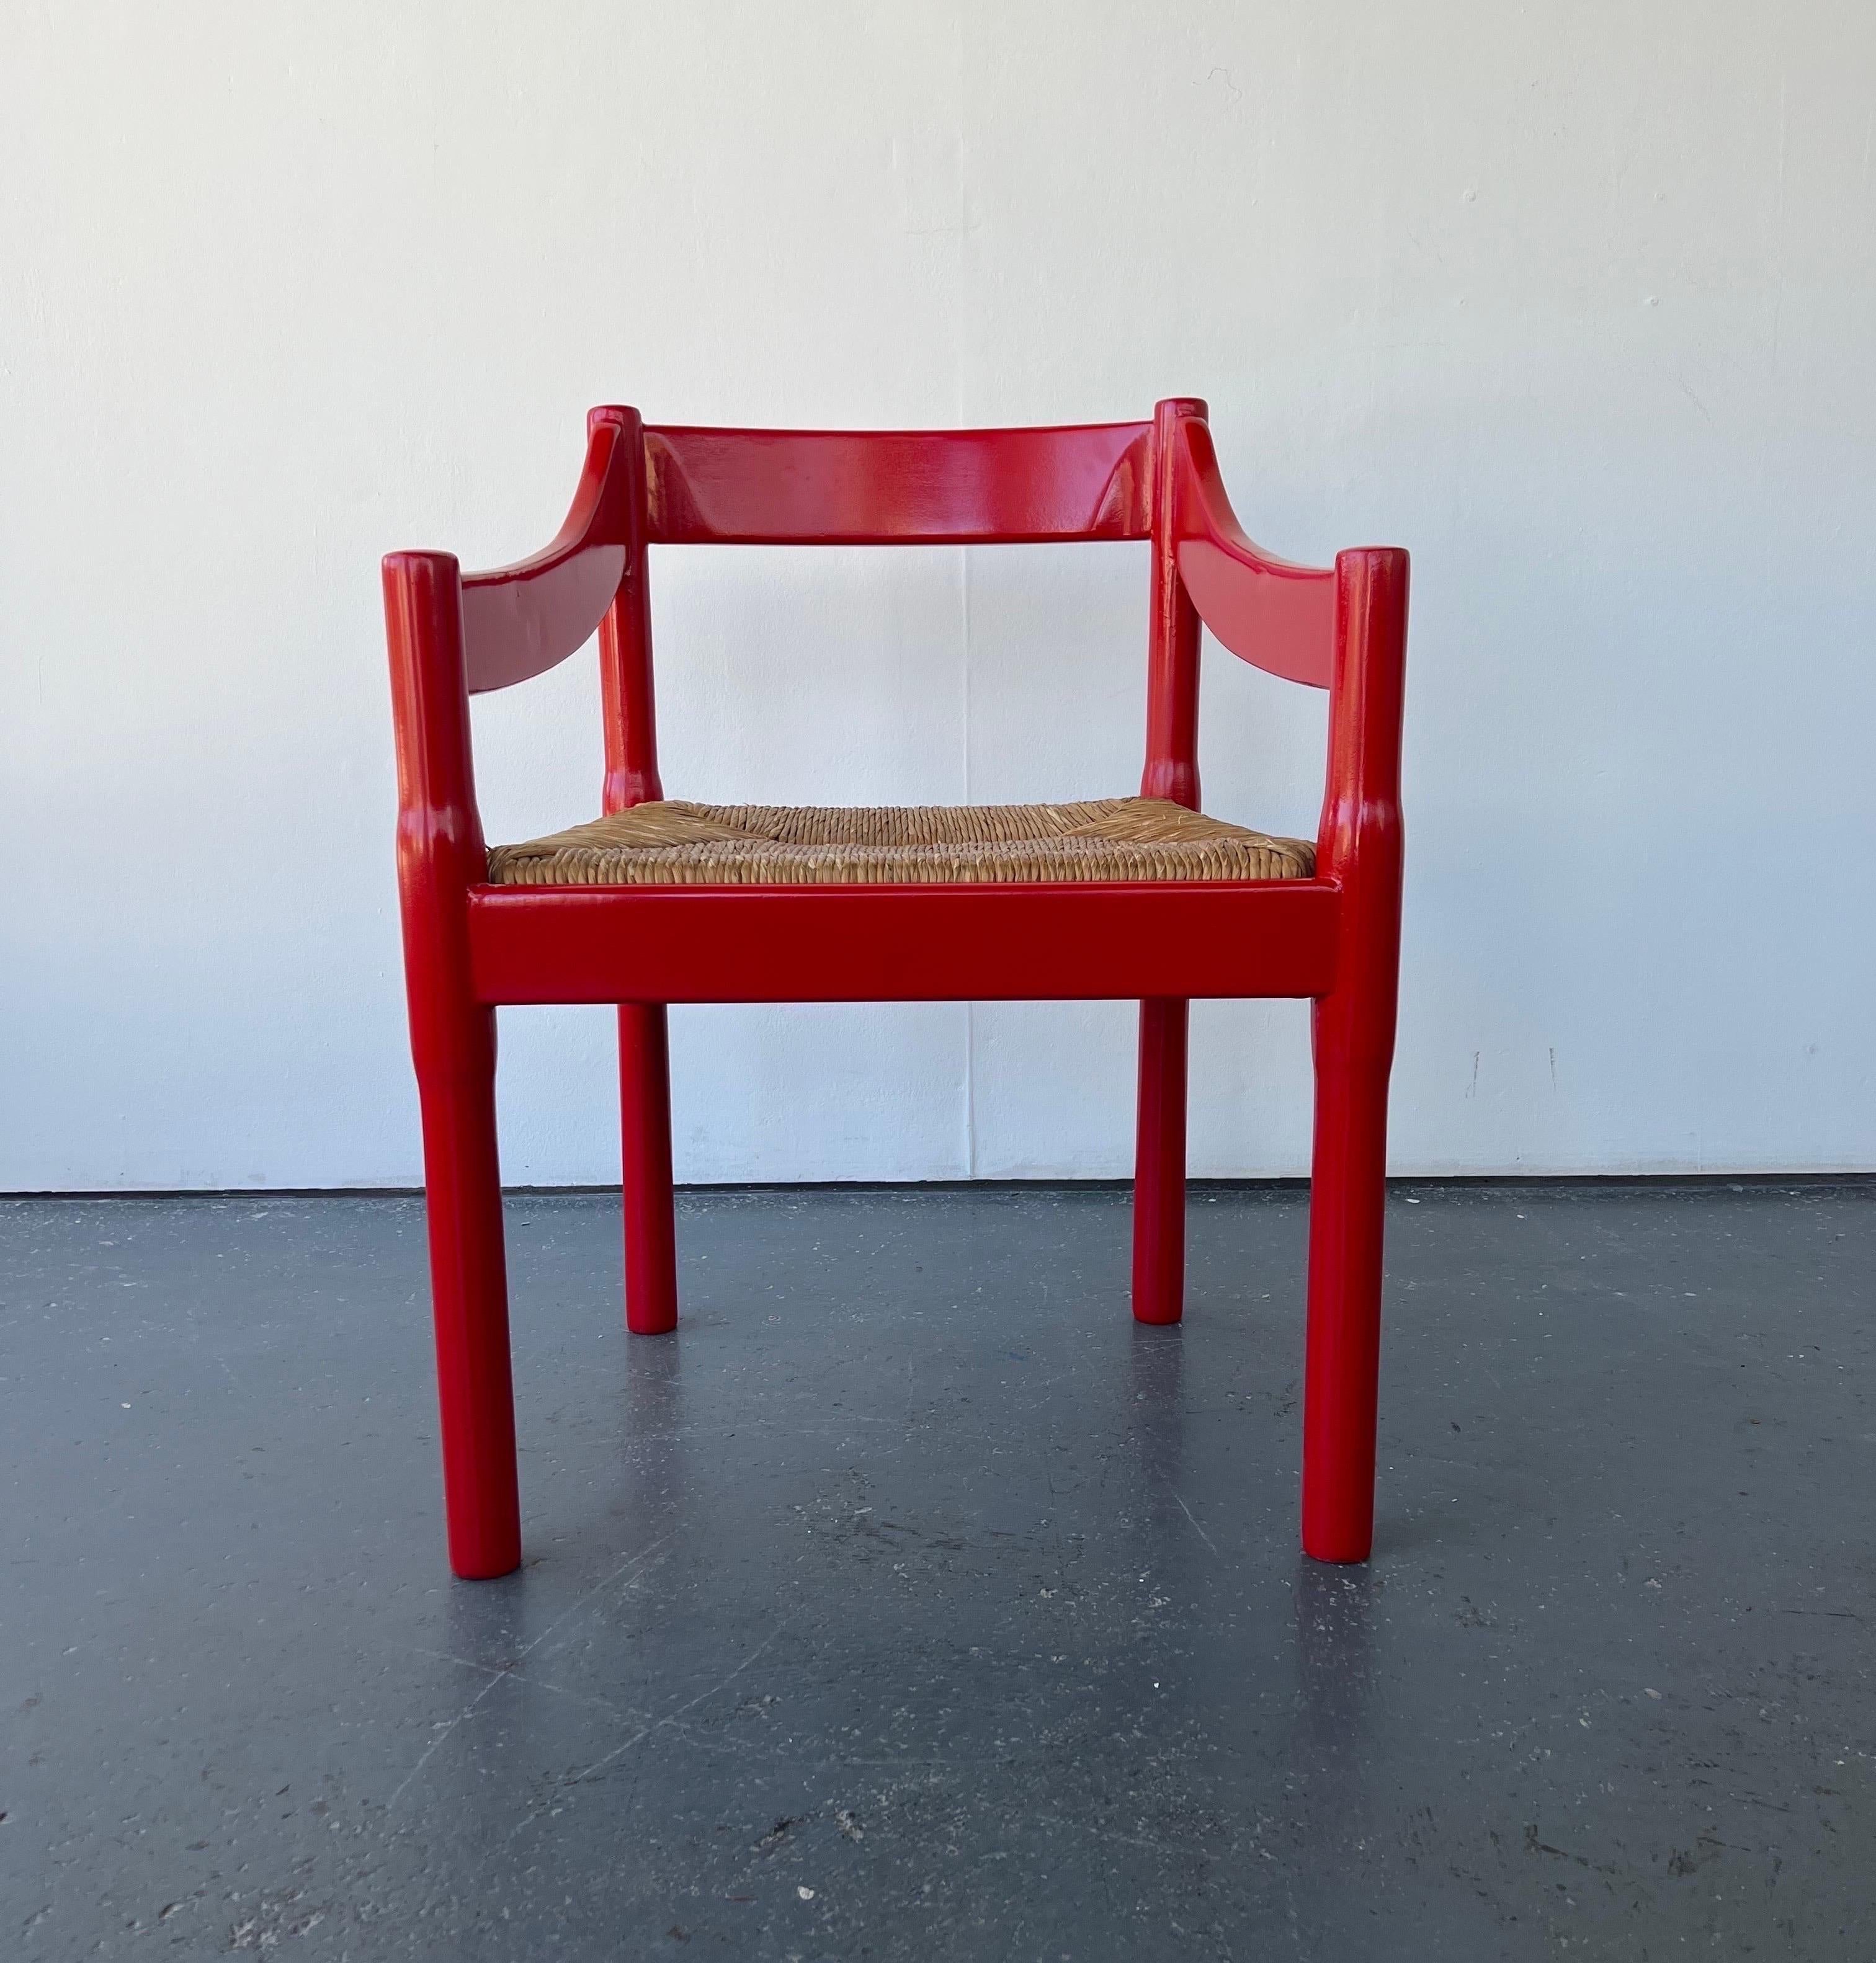 20th Century Single Glossy Red Carimate Carver Chair by Vico Magistretti for Habitat